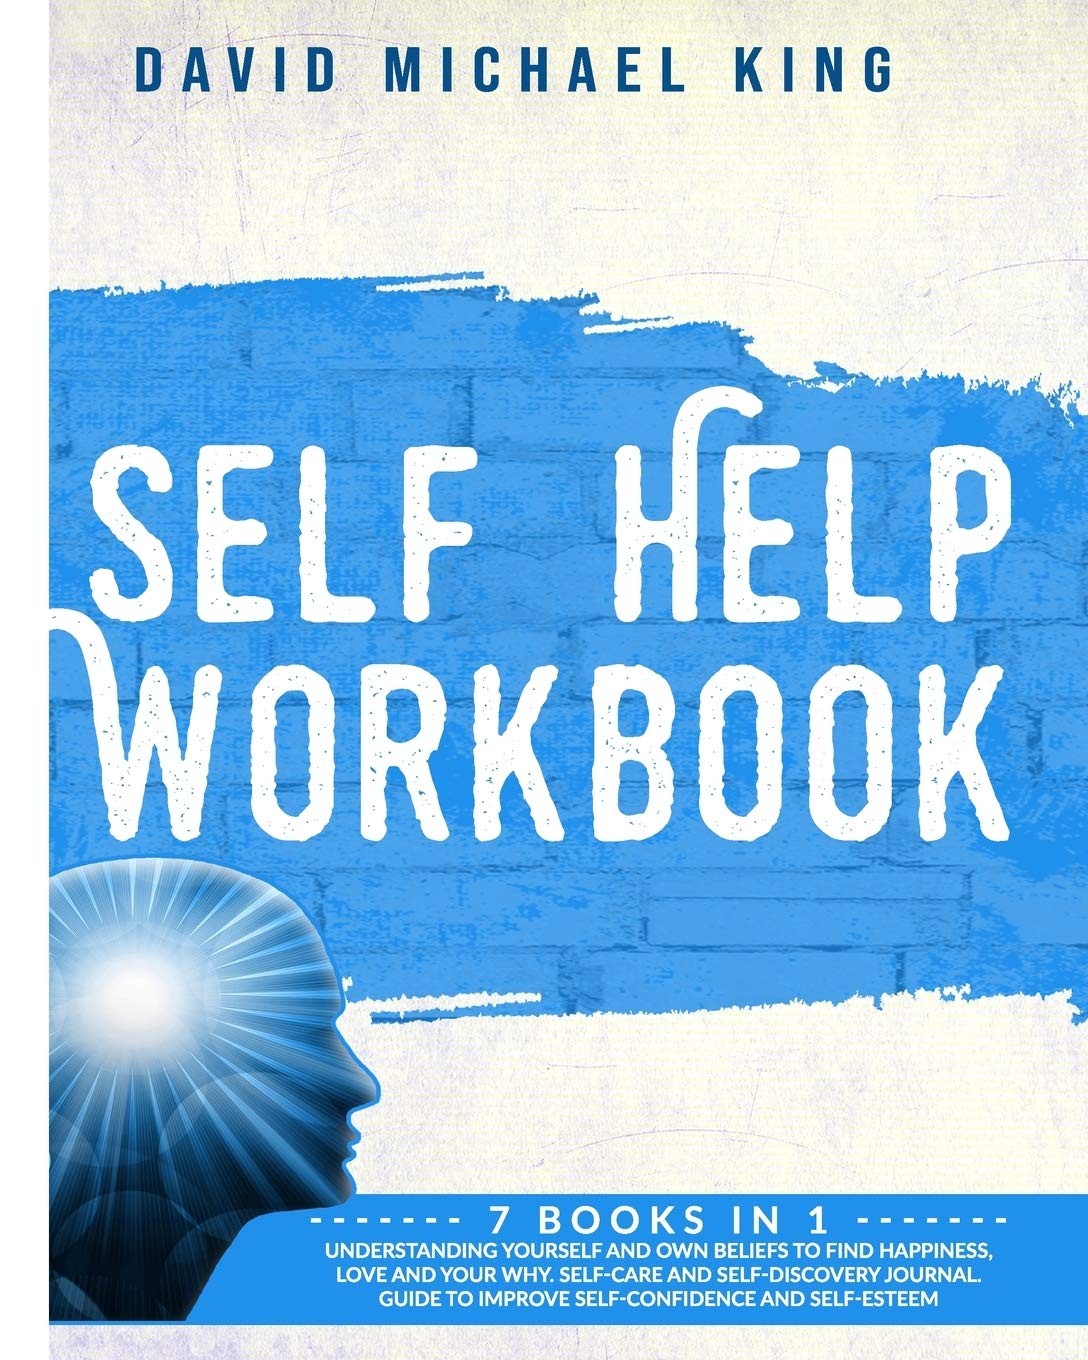 Self Help Workbook: 7 BOOKS IN 1: Understanding Yourself and Own Beliefs to Find Happiness, Love and Your Why. Self-Care and Self-Discovery Journal. Guide to Improve Self-Confidence and Self-Esteem